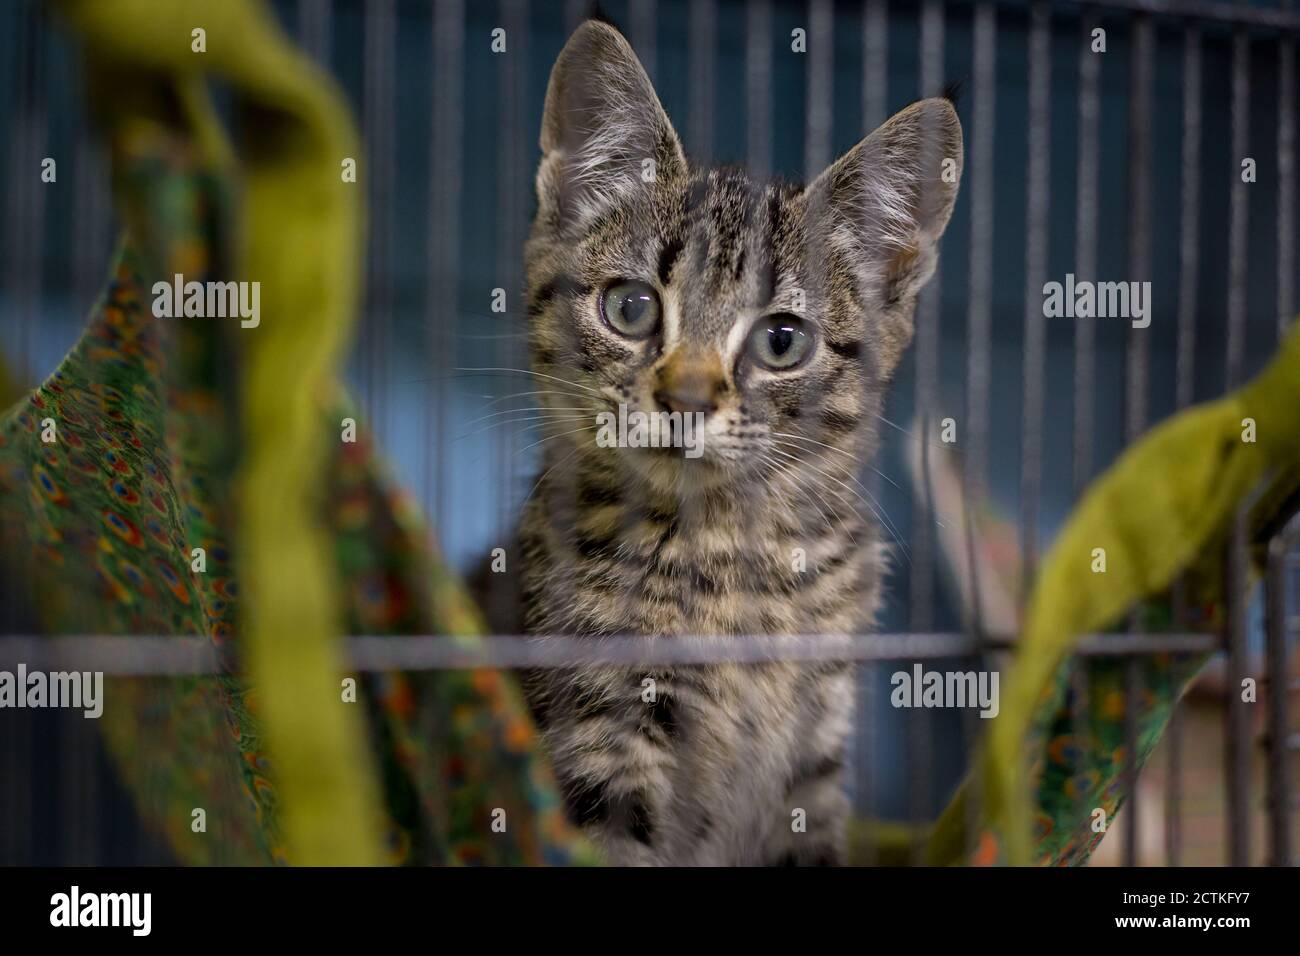 Cat in a cage in a veterinary clinic animal shelter looking out of a cage. Stock Photo